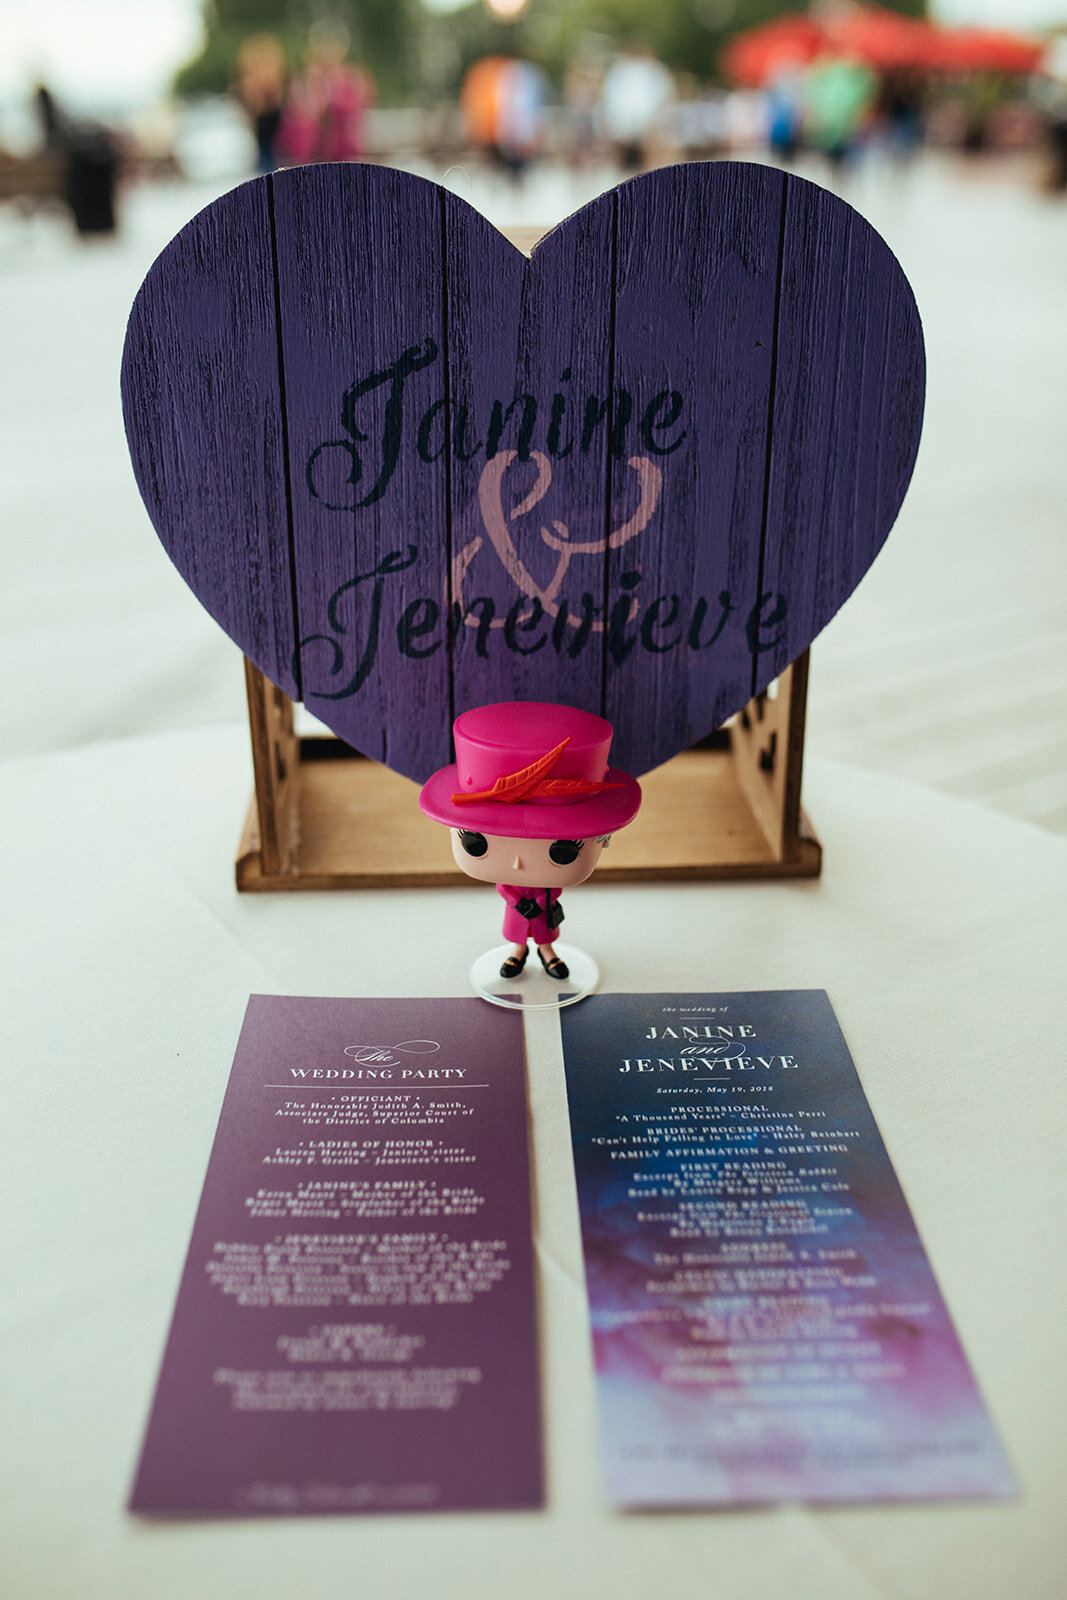 Wooden heart sign with couple's names and wedding stationery in Alexandria VA Shawnee Custalow